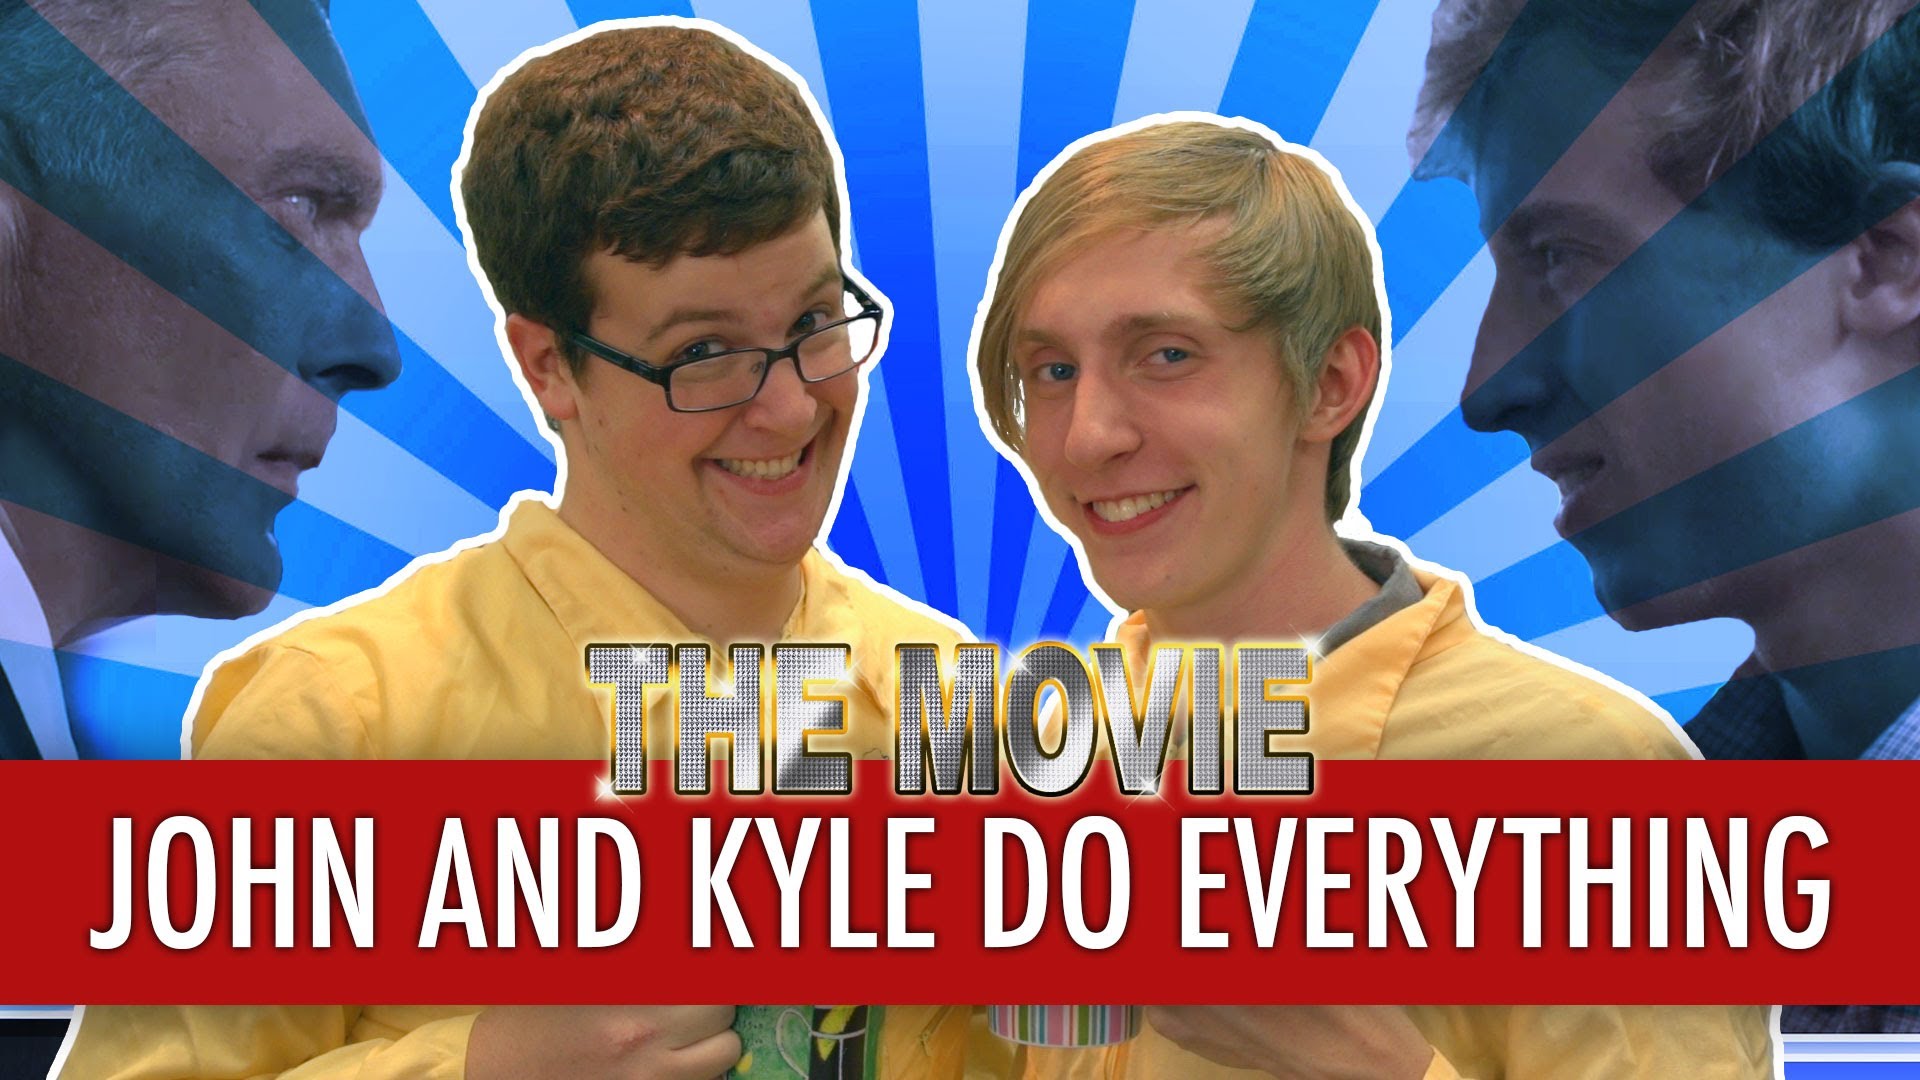 John and Kyle Do Everything